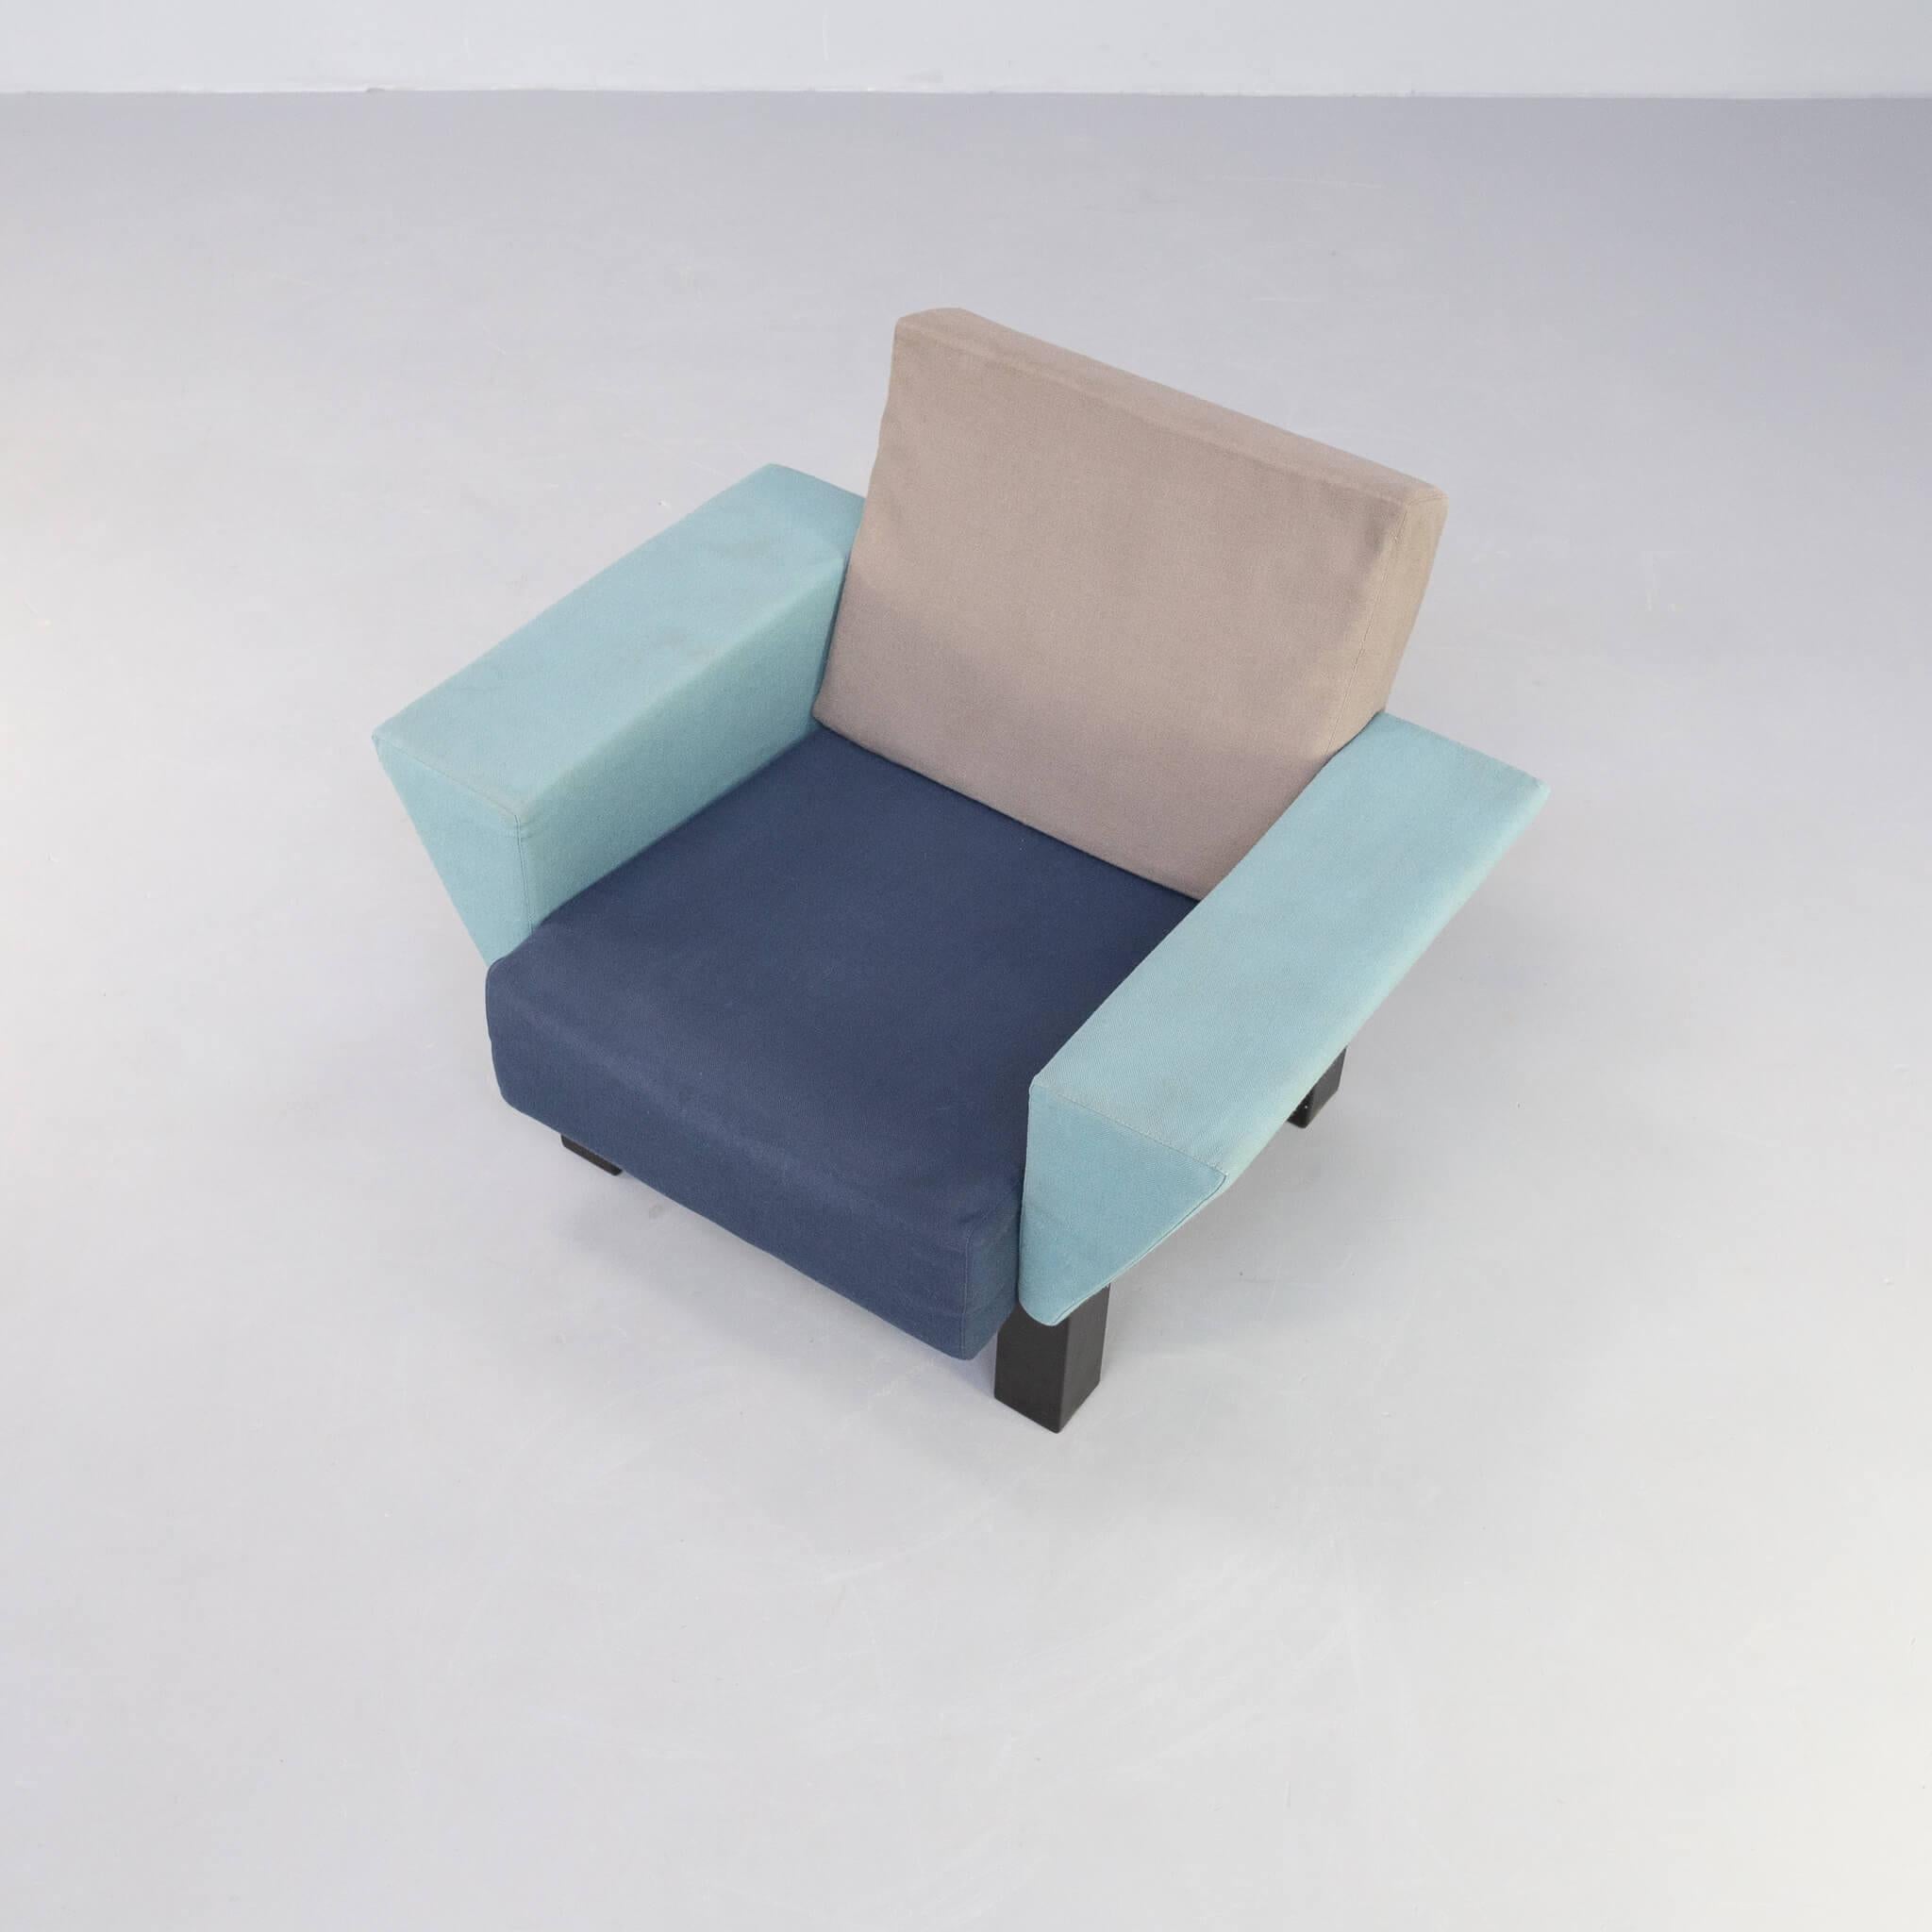 80s Ettore Sottsass ‘Westside’ Lounge Chair for Knoll For Sale 1